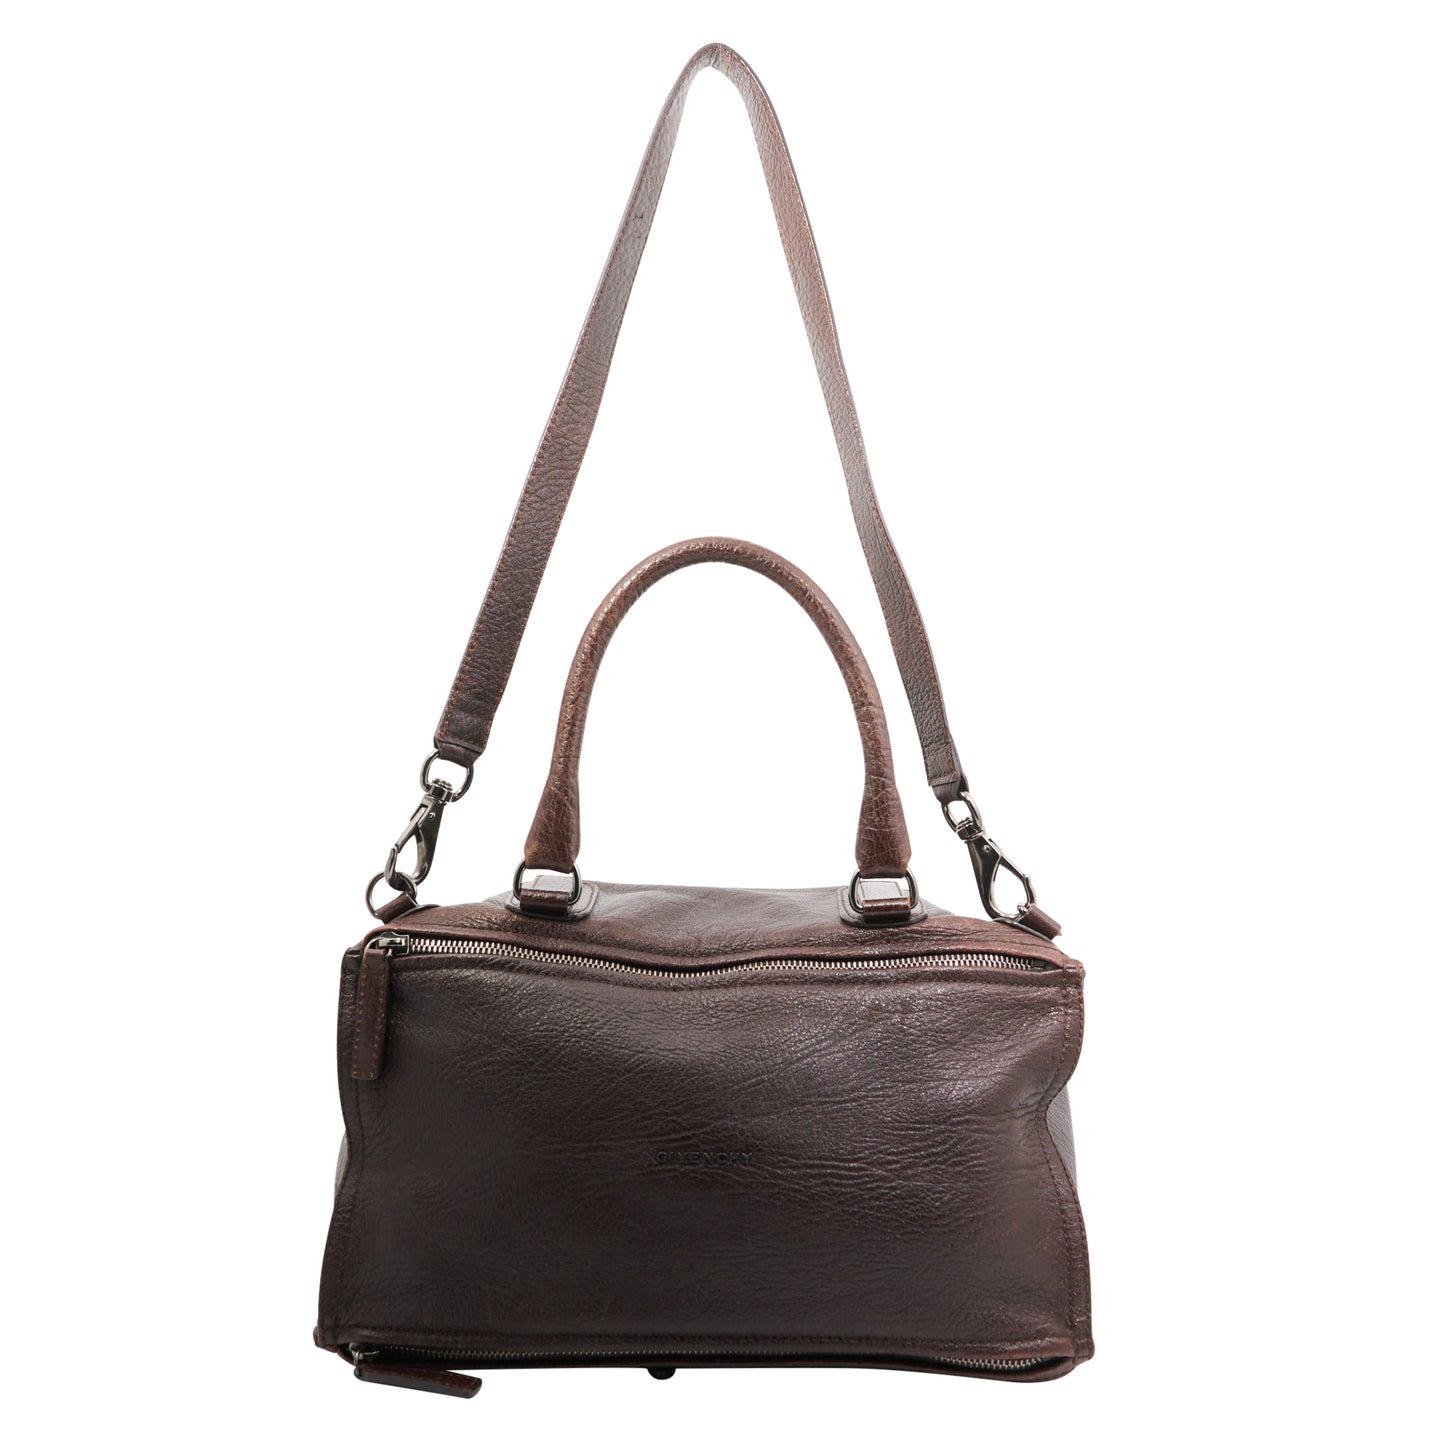 Givenchy Leather Pandora Bag in Brown